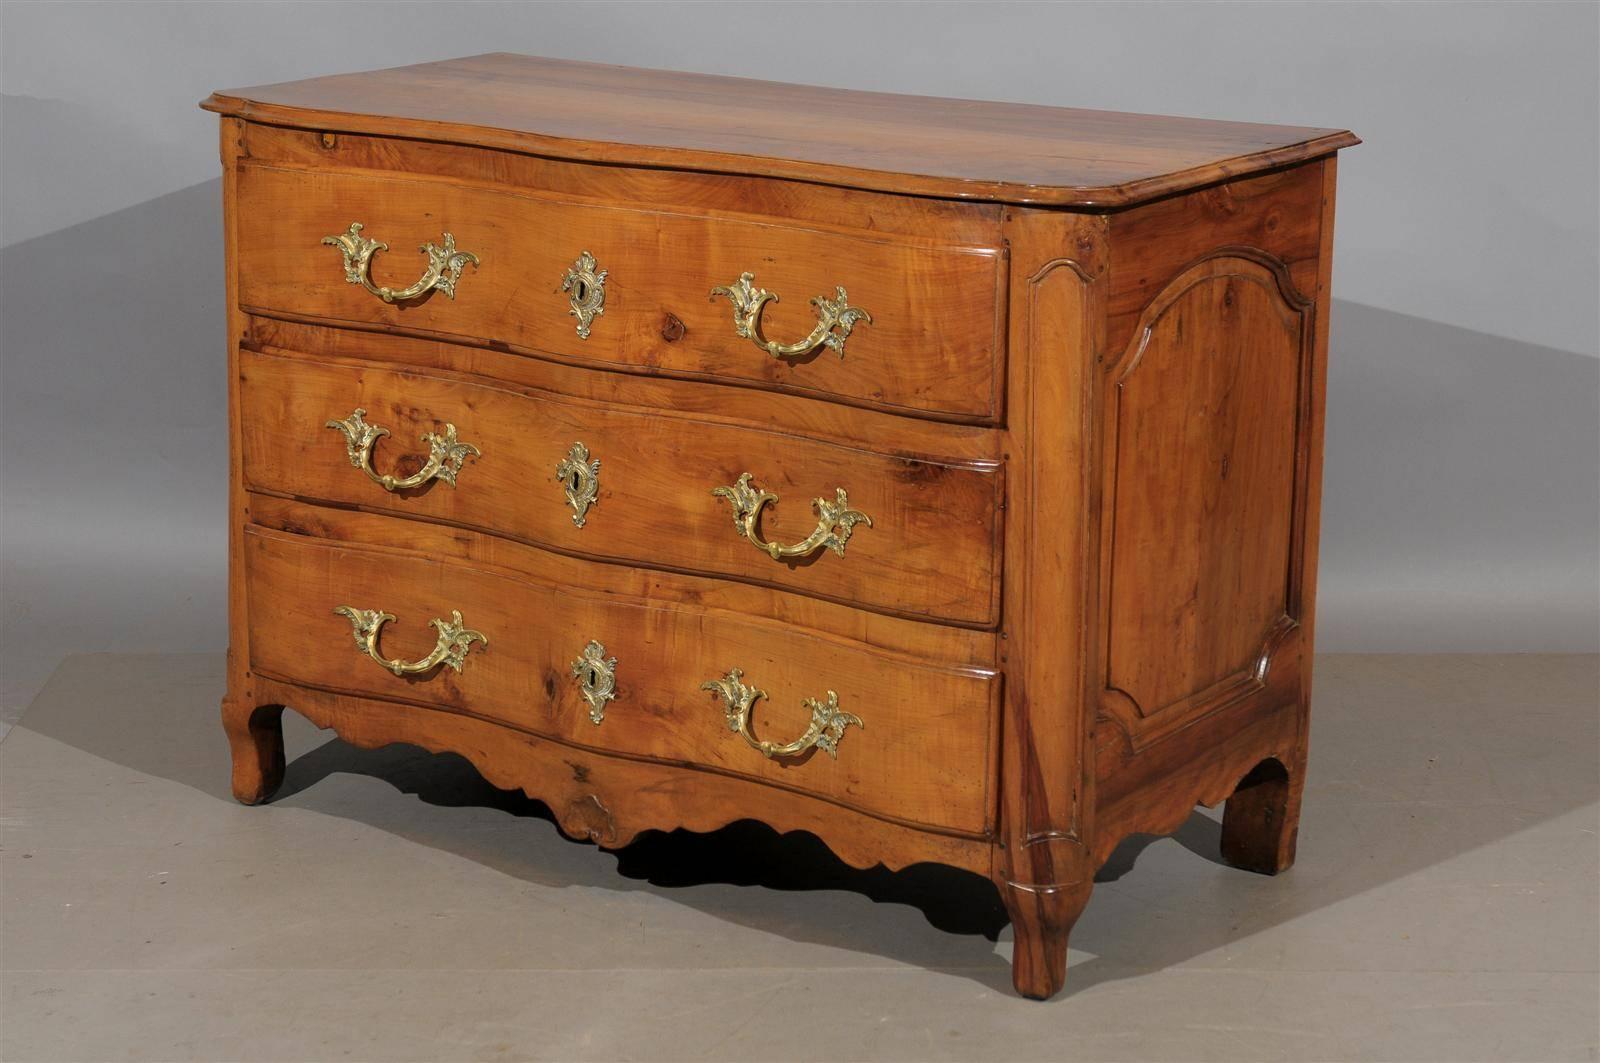 Early 19th Century French Fruitwood Serpentine Front Commode with 3 Drawers In Good Condition For Sale In Atlanta, GA